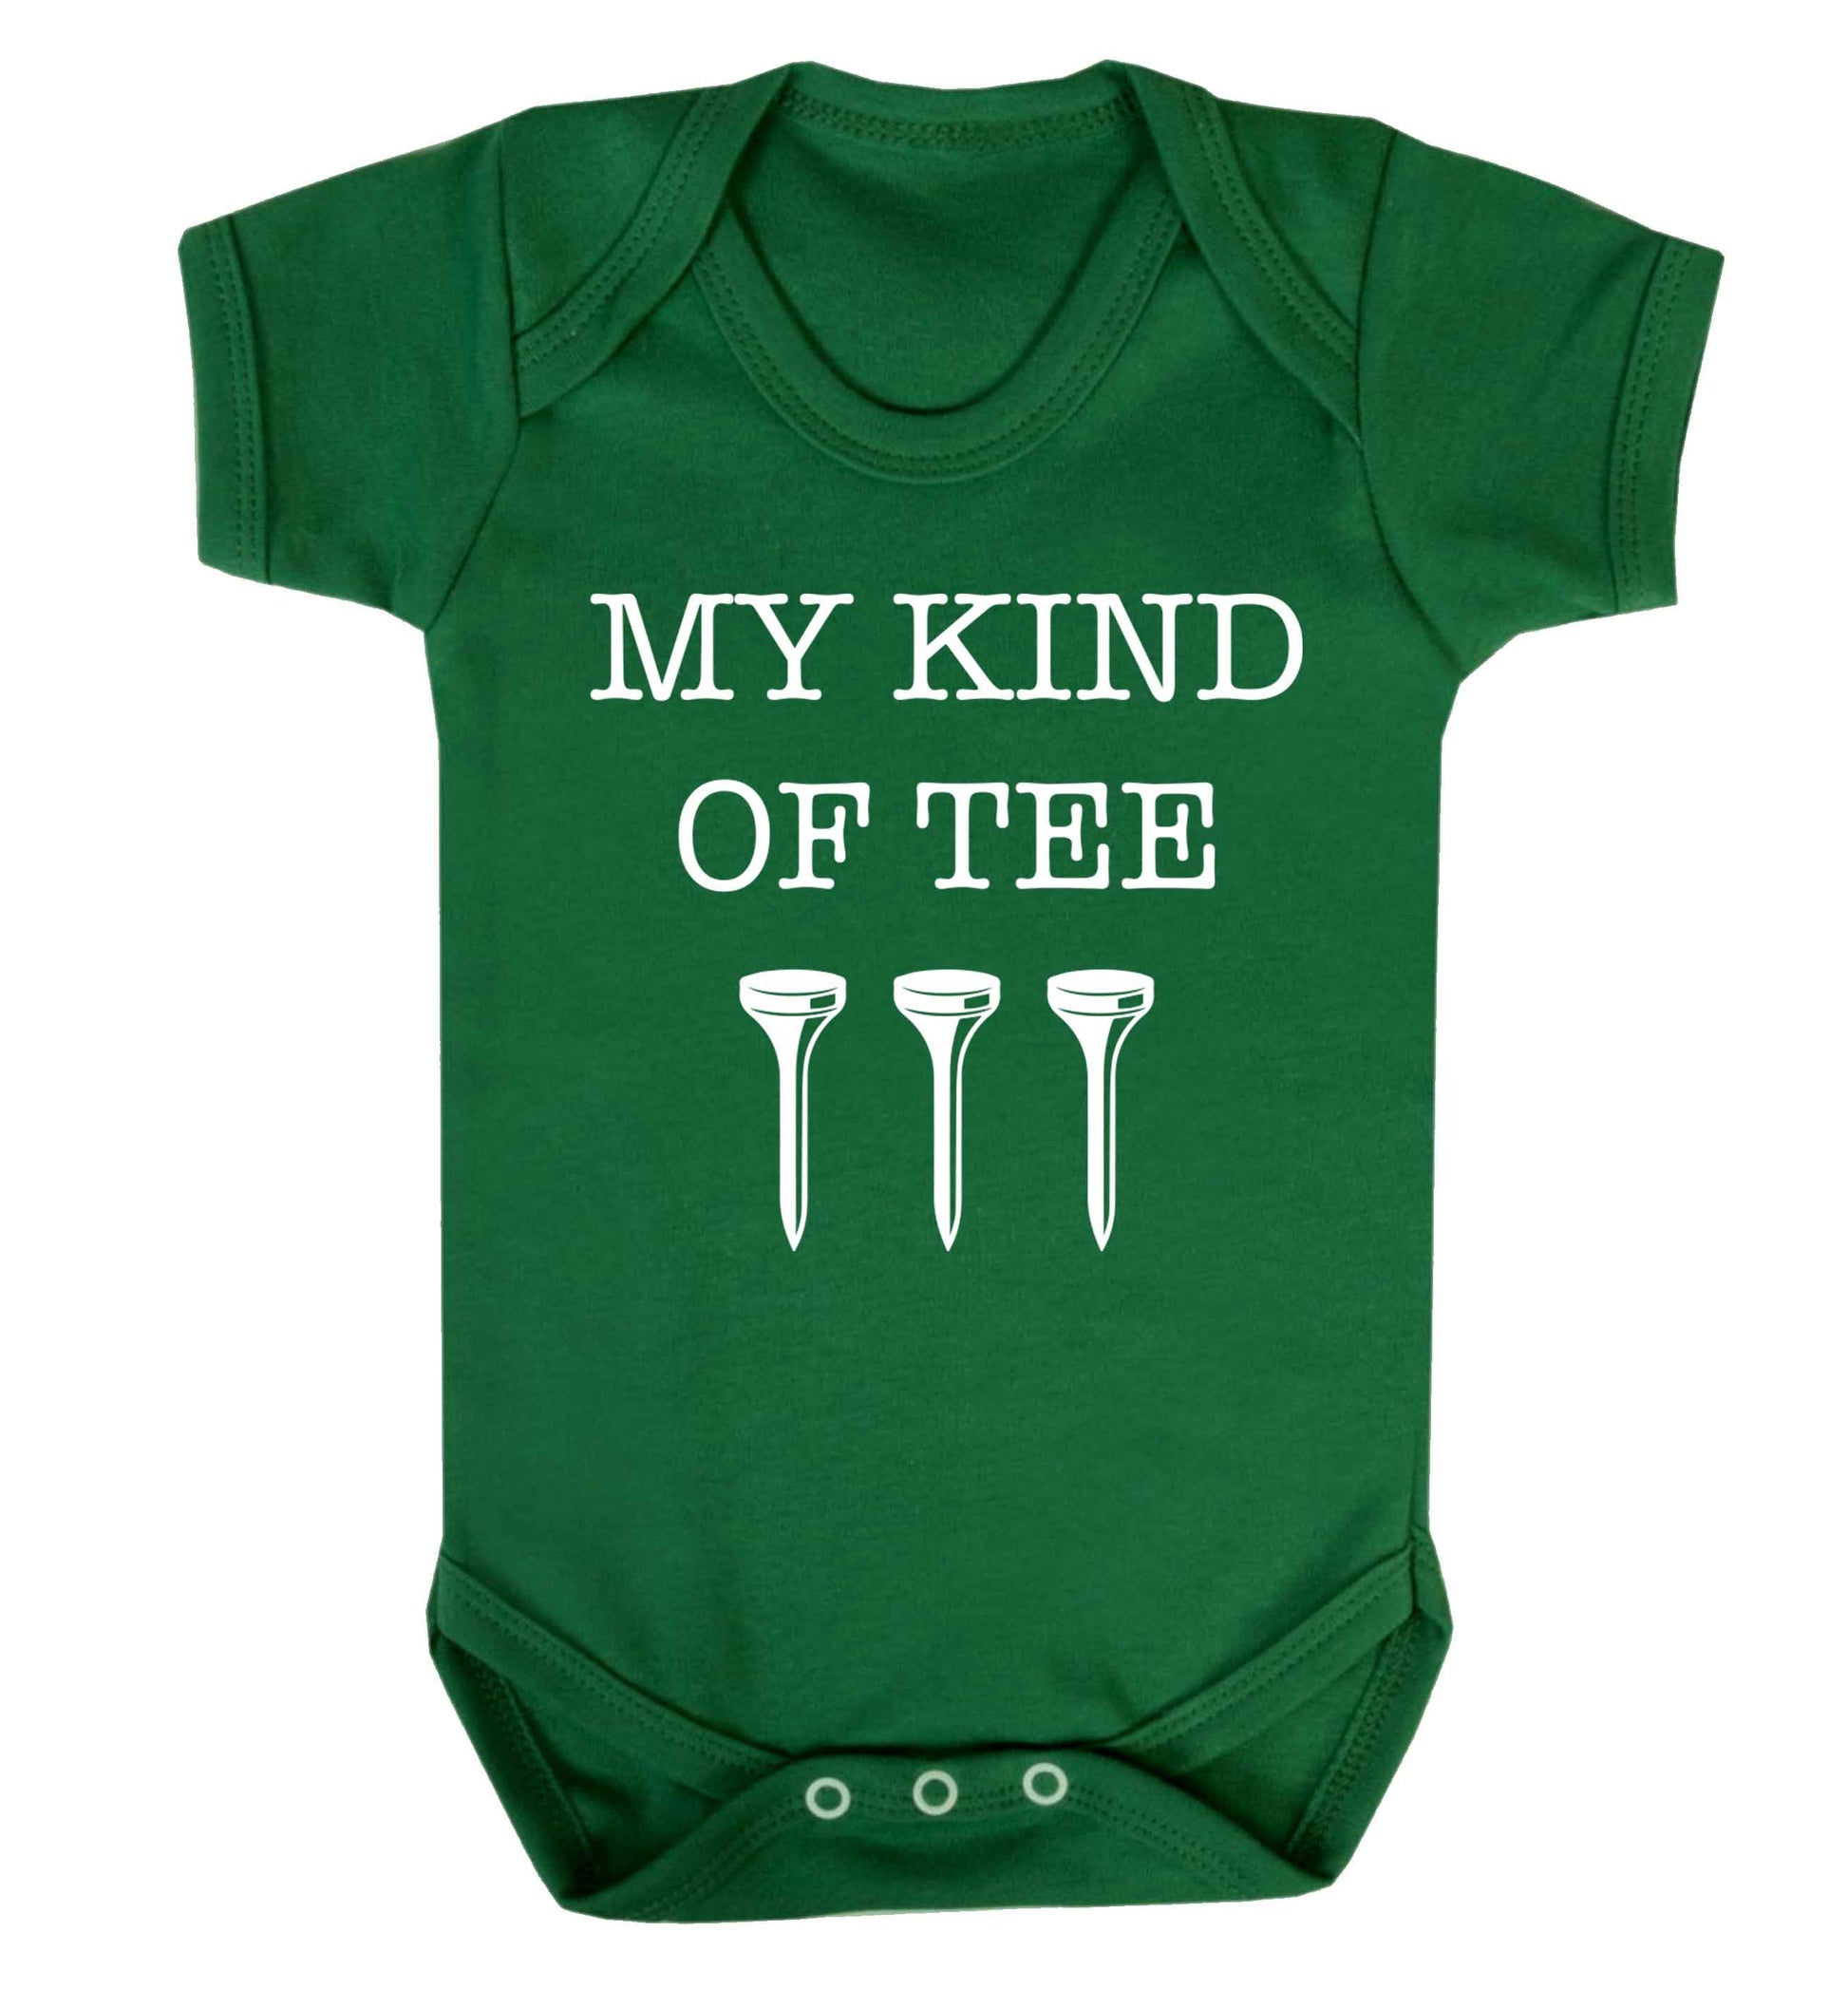 My kind of tee Baby Vest green 18-24 months